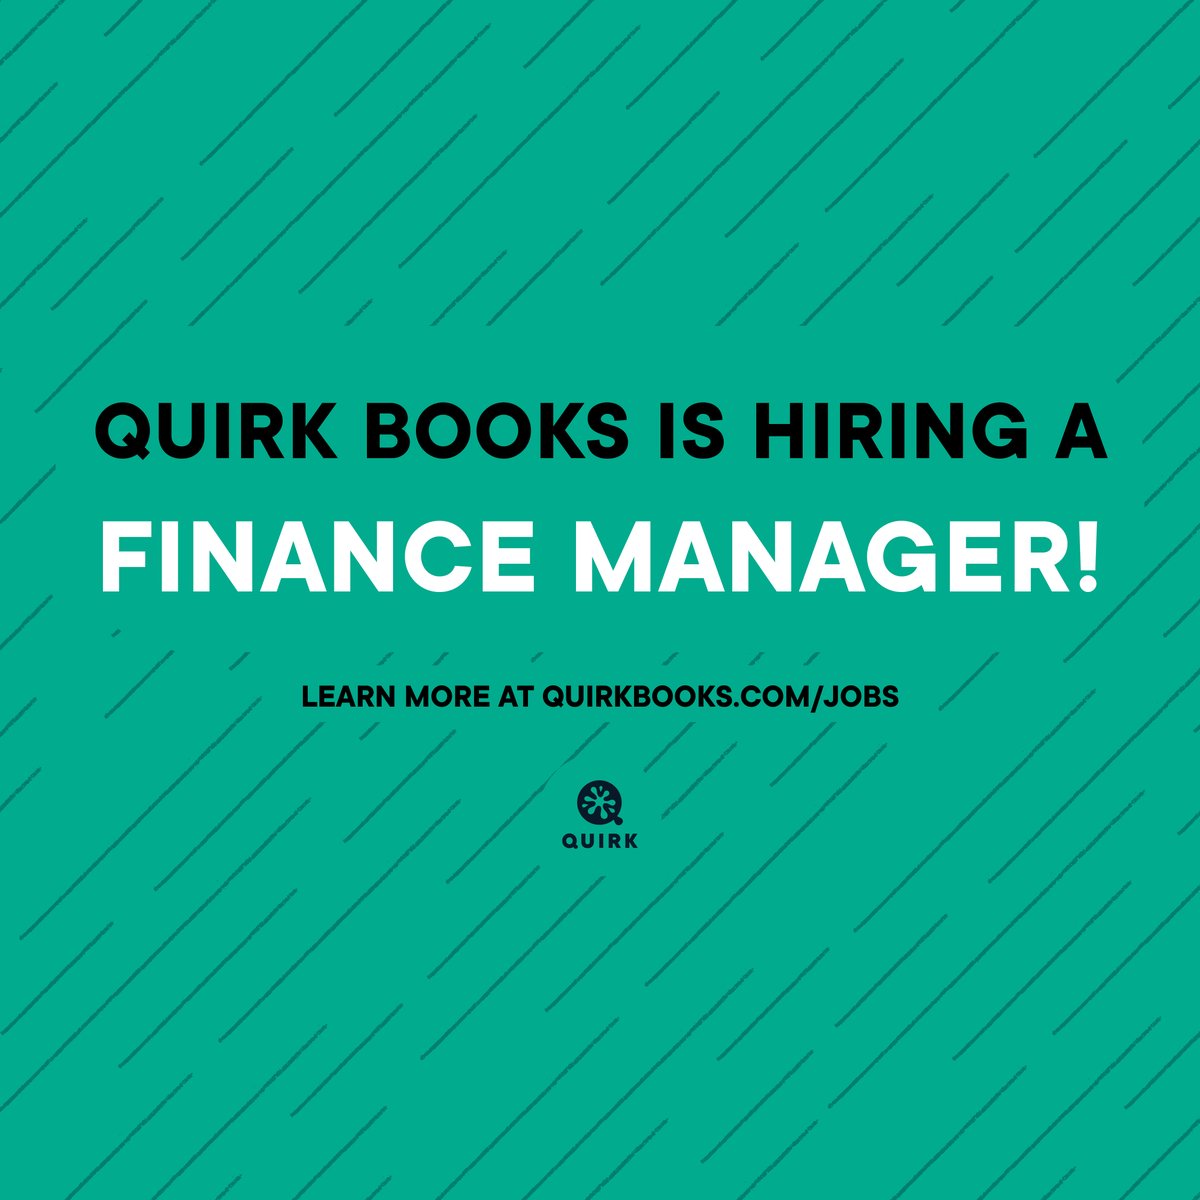 Quirk Books is hiring an organized, detail-oriented, and self-motivated finance manager with 3+ years of experience! This position is based in Philadelphia, with Thursdays in the office. Visit quirkbooks.com/jobs for more information!